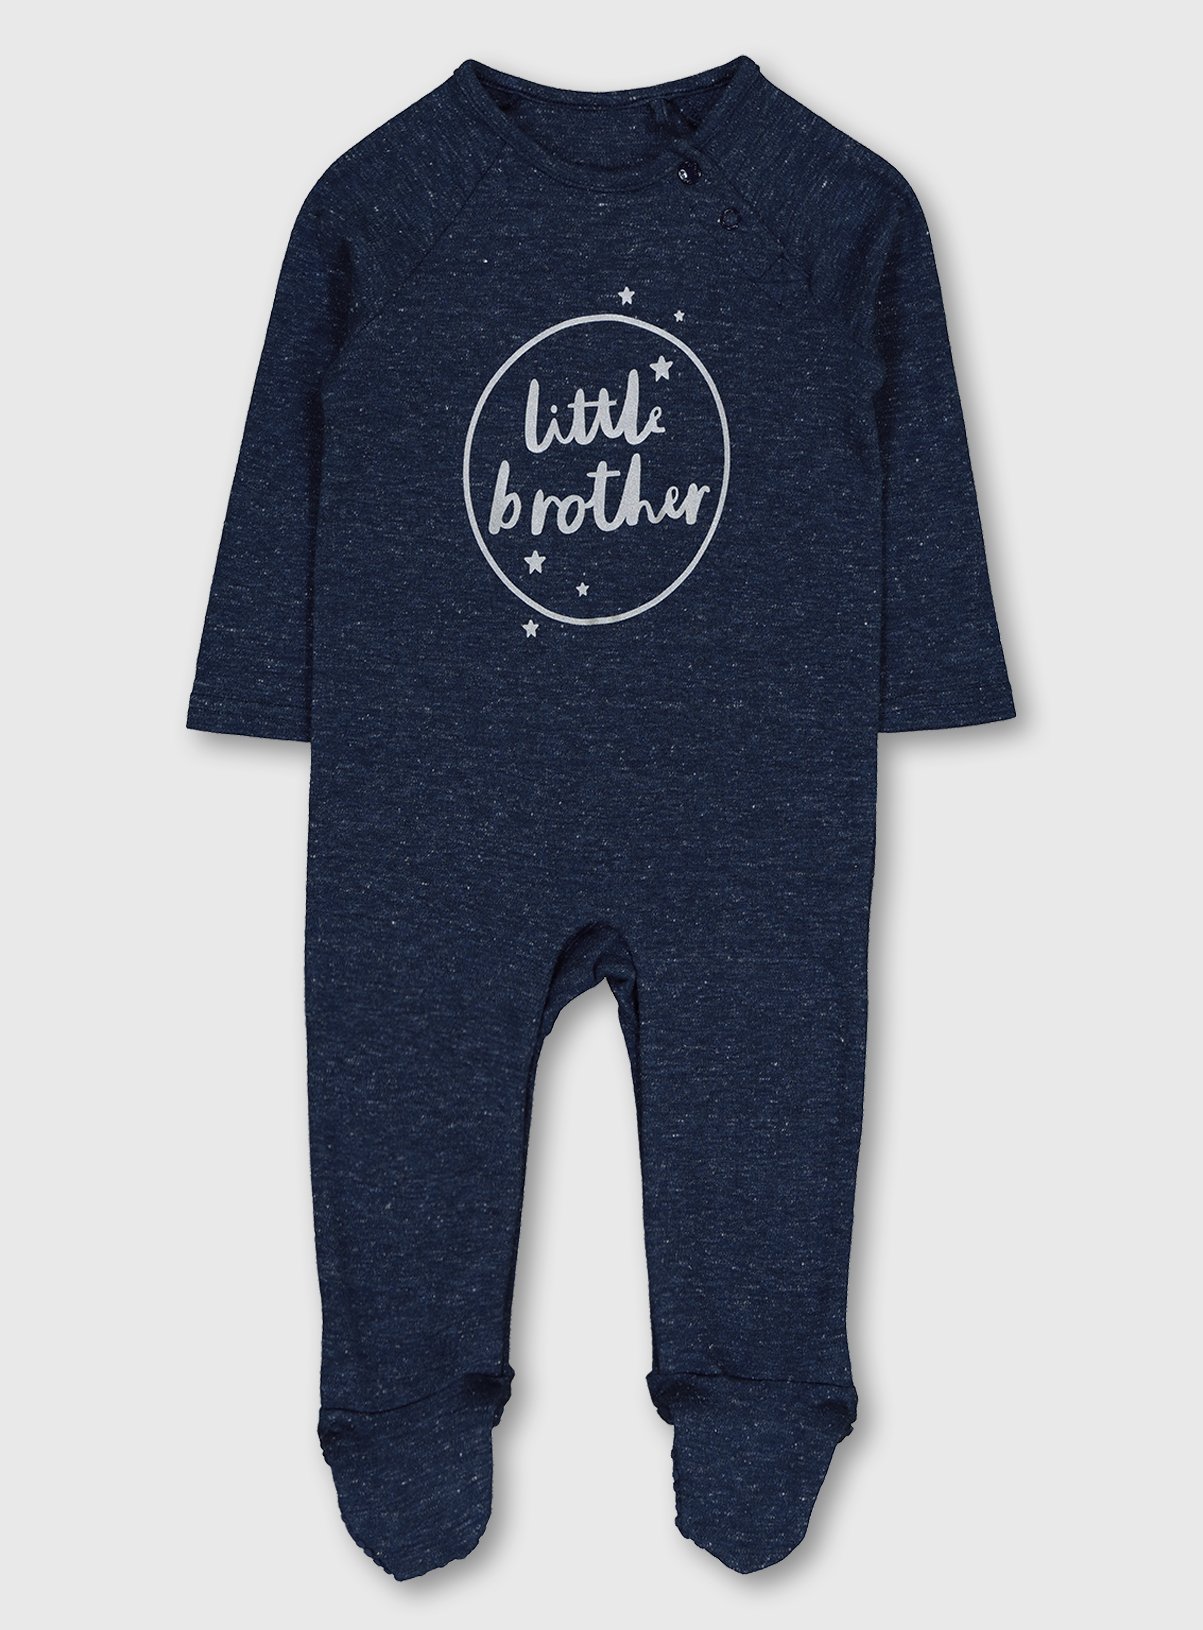 Baby Navy Marl \u0026 Silver 'Little Brother 